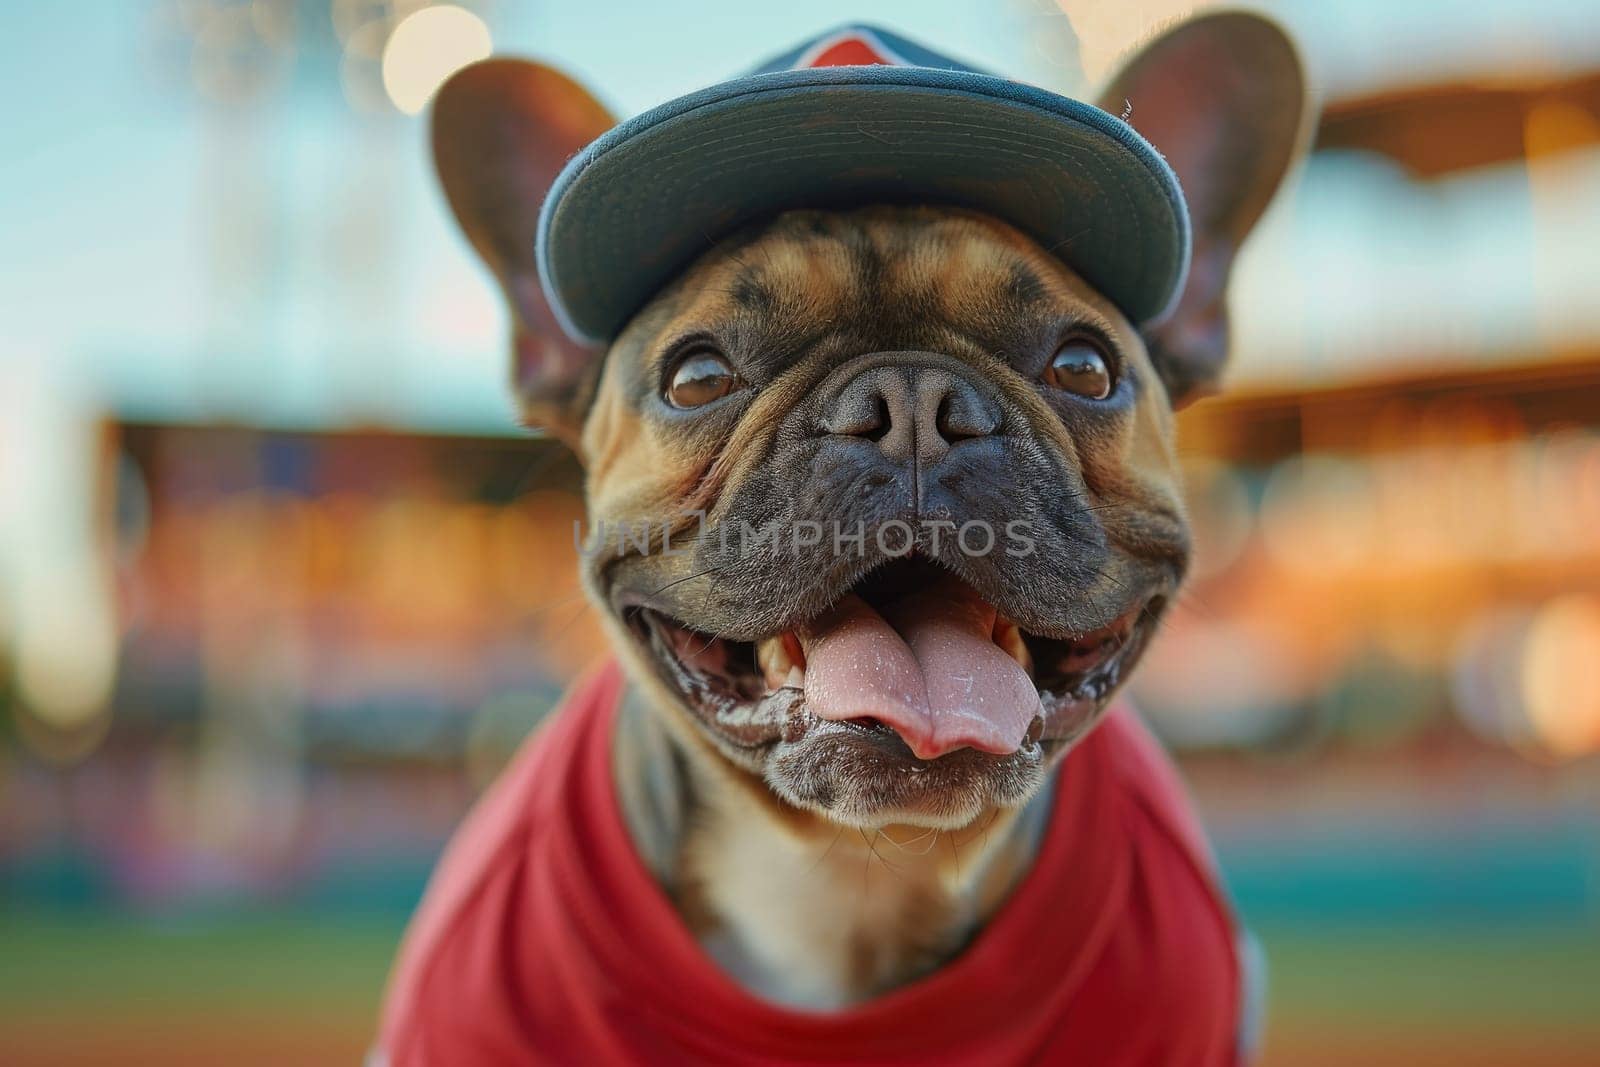 Dog playing and wearing a baseball by itchaznong